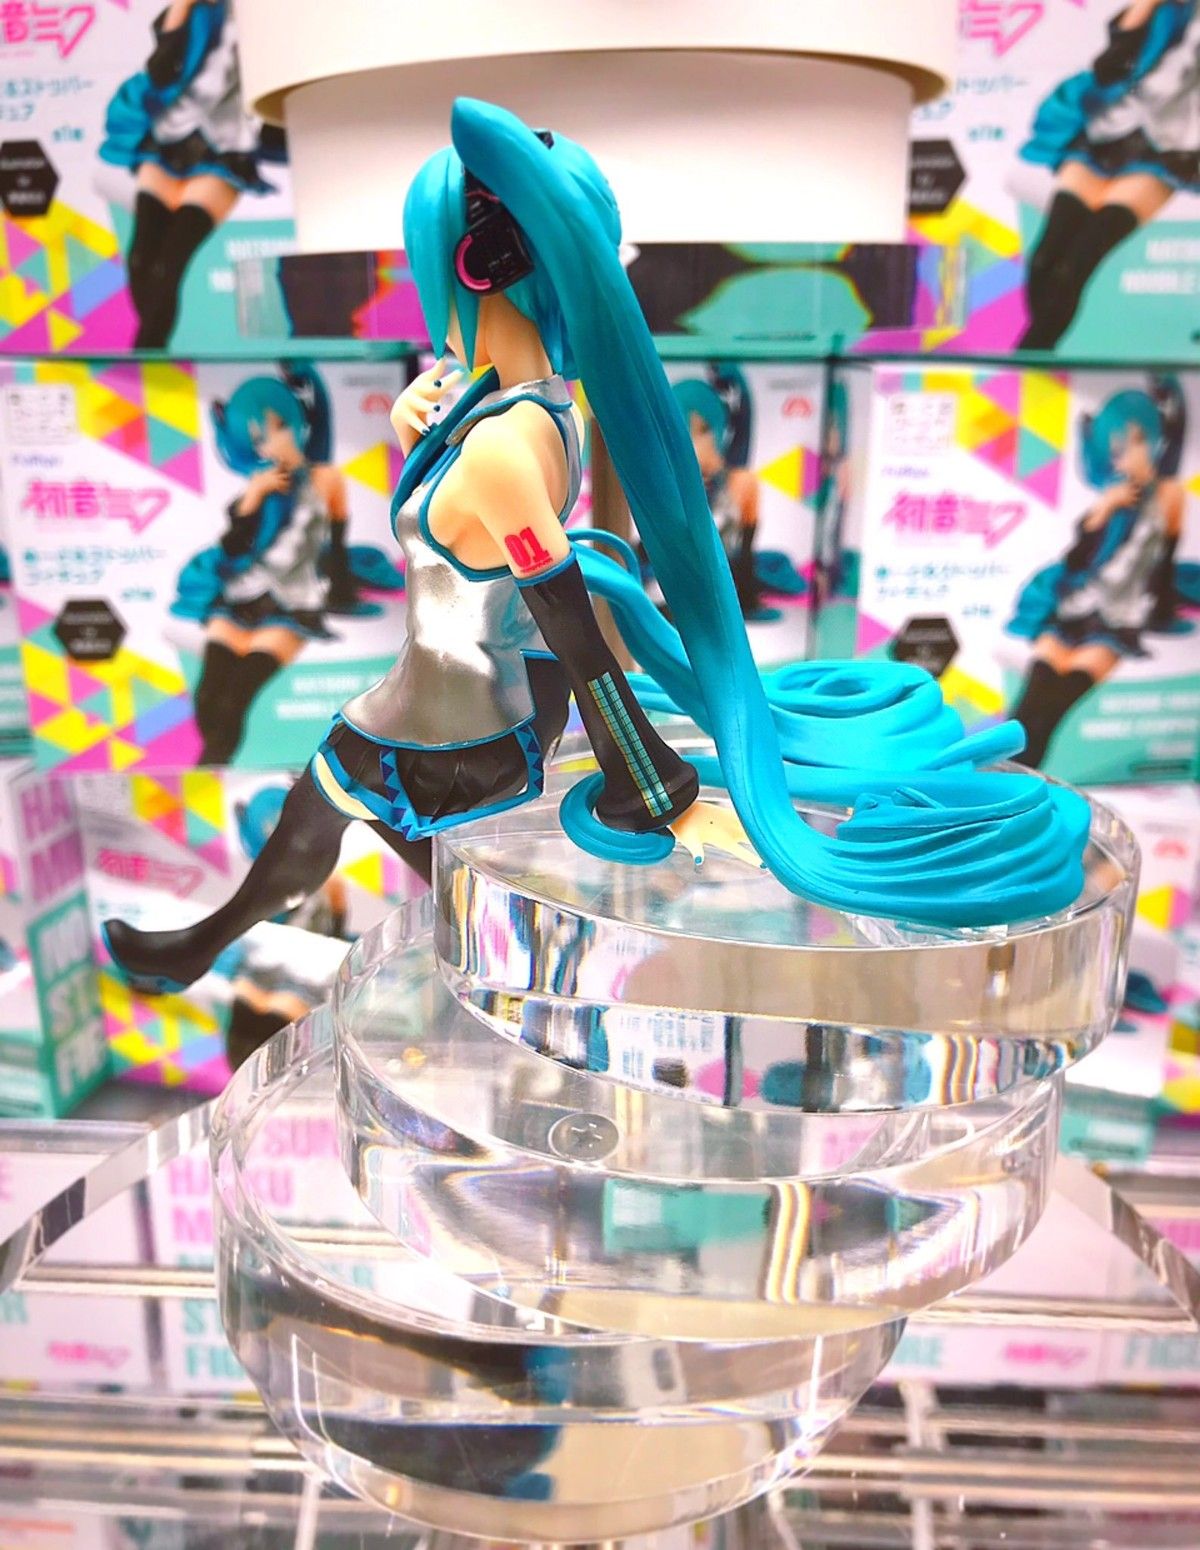 [Hatsune Miku] Nuyoru Stopper Figure, too much color and become a topic erotic 10